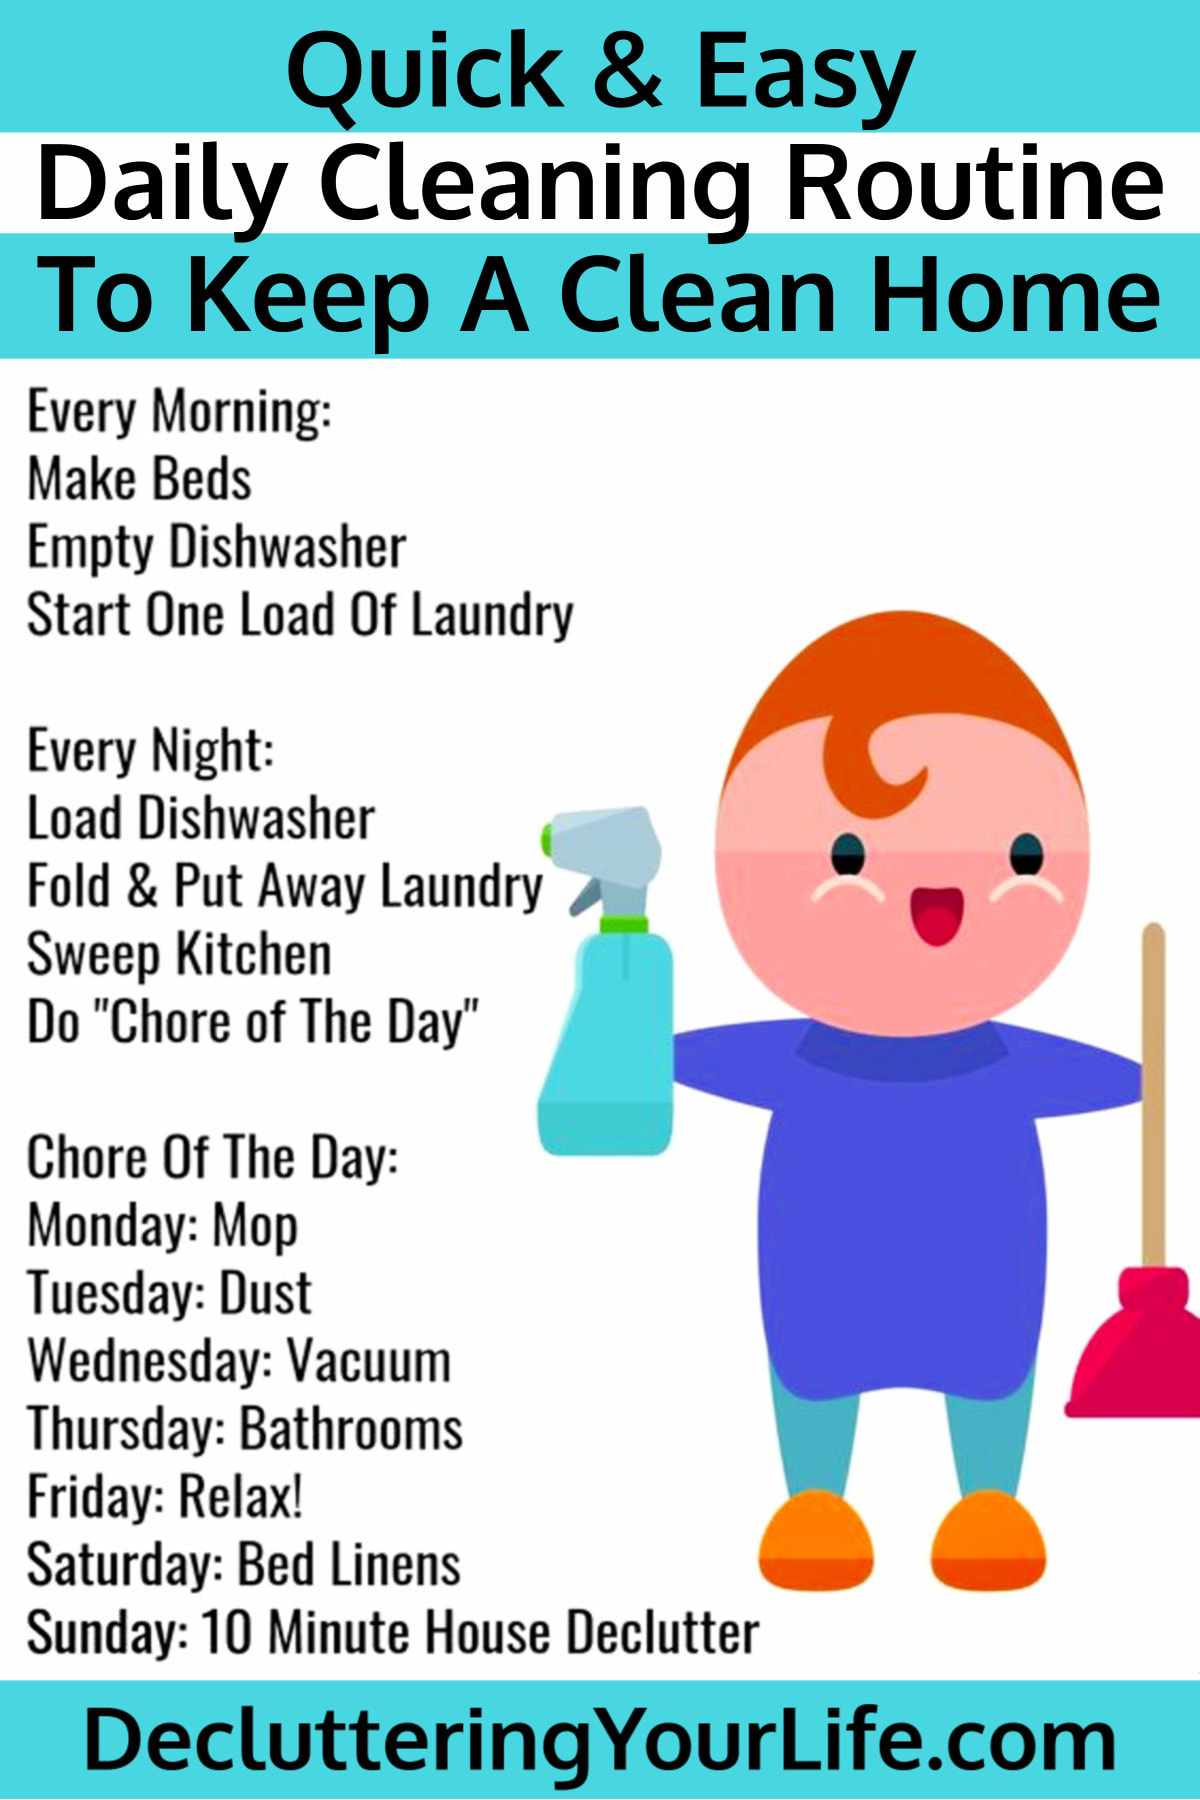 Daily Cleaning Routine Checklist To Keep a Clean House